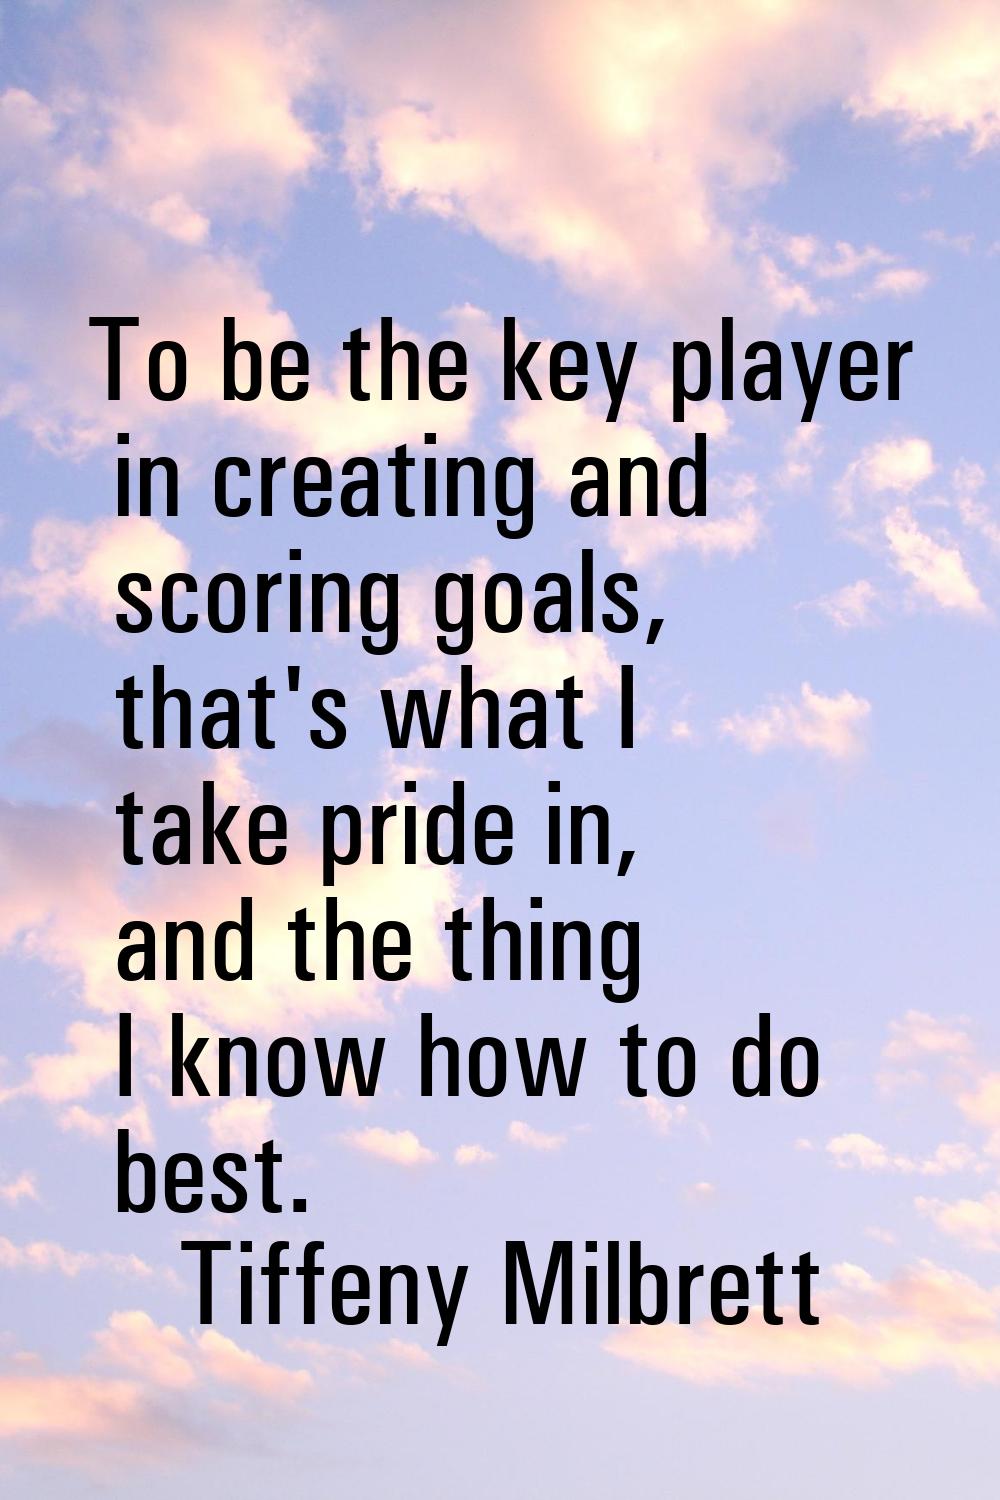 To be the key player in creating and scoring goals, that's what I take pride in, and the thing I kn